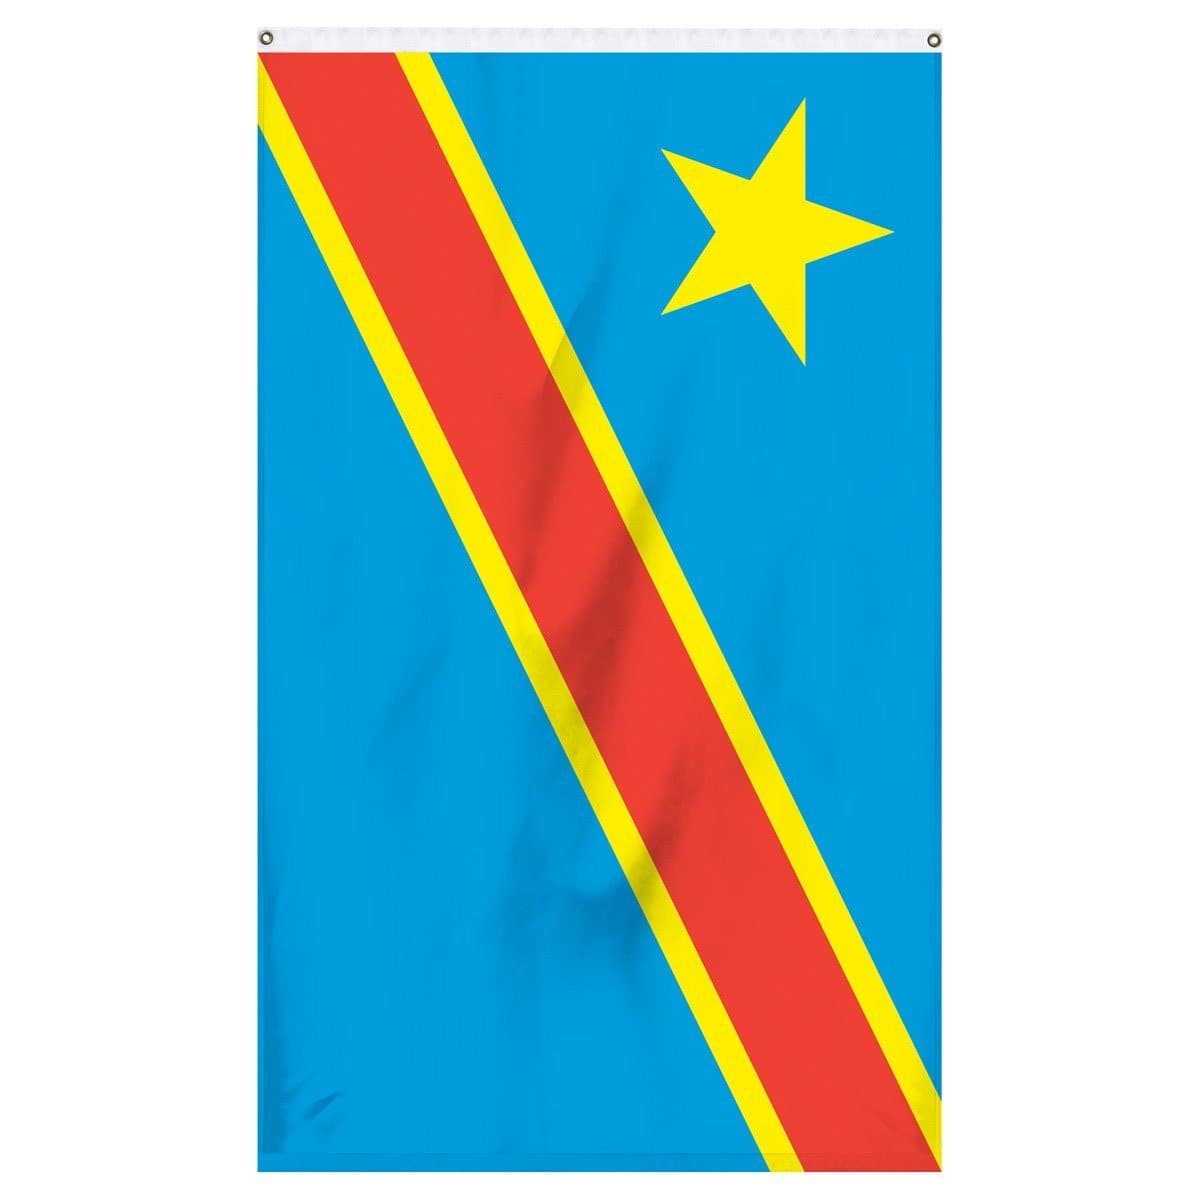 The Democratic Republic of Congo national flag for sale